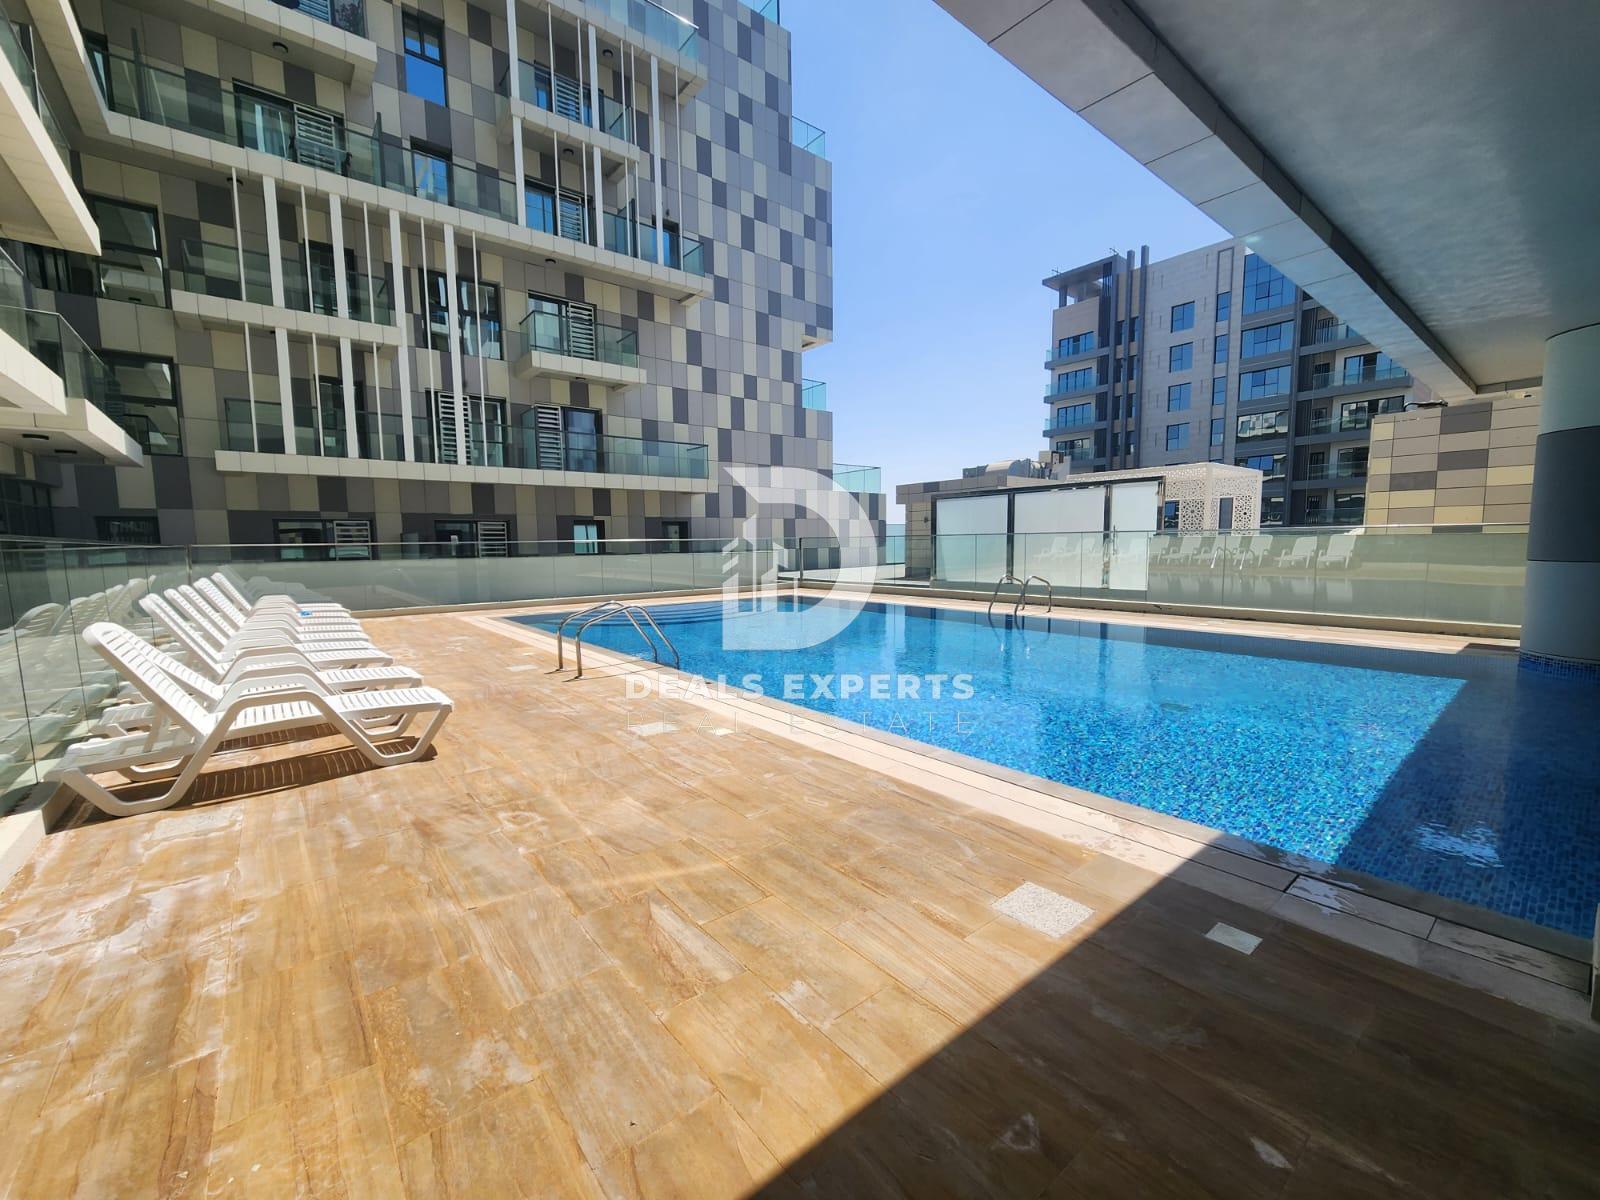 2 bed, 3 bath Apartment for rent in Al Raha Lofts, Al Raha Beach, Abu Dhabi for price AED 100000 yearly 